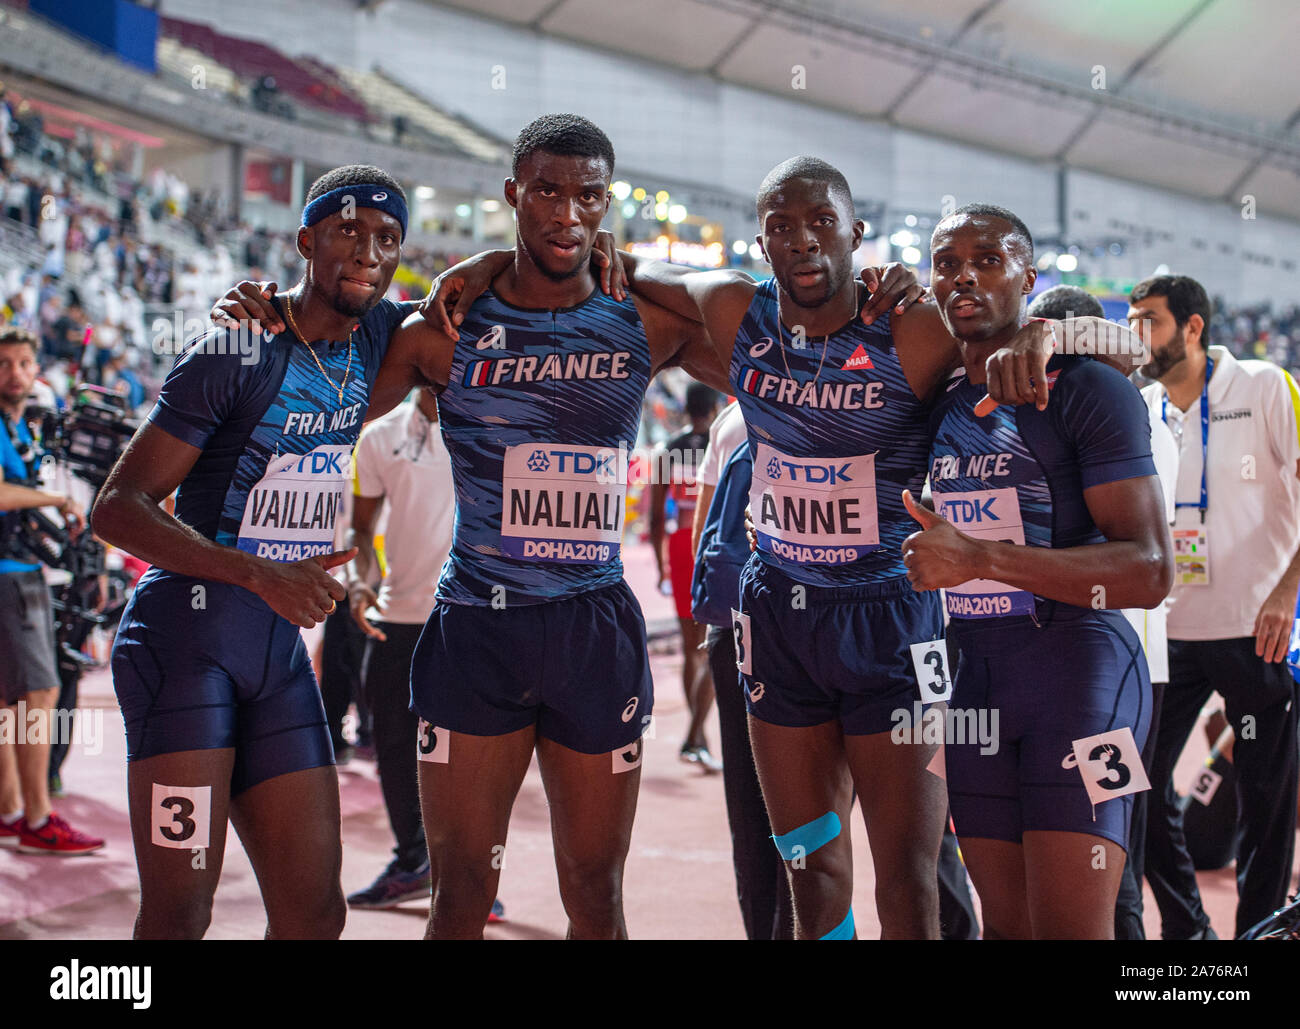 DOHA - QATAR OCT 6: Ludvy Vaillant, Christopher Naliali, Mame-Ibra Anne and  Thomas Jordier of France competing in the men's 4x400m relay final on Day  Stock Photo - Alamy